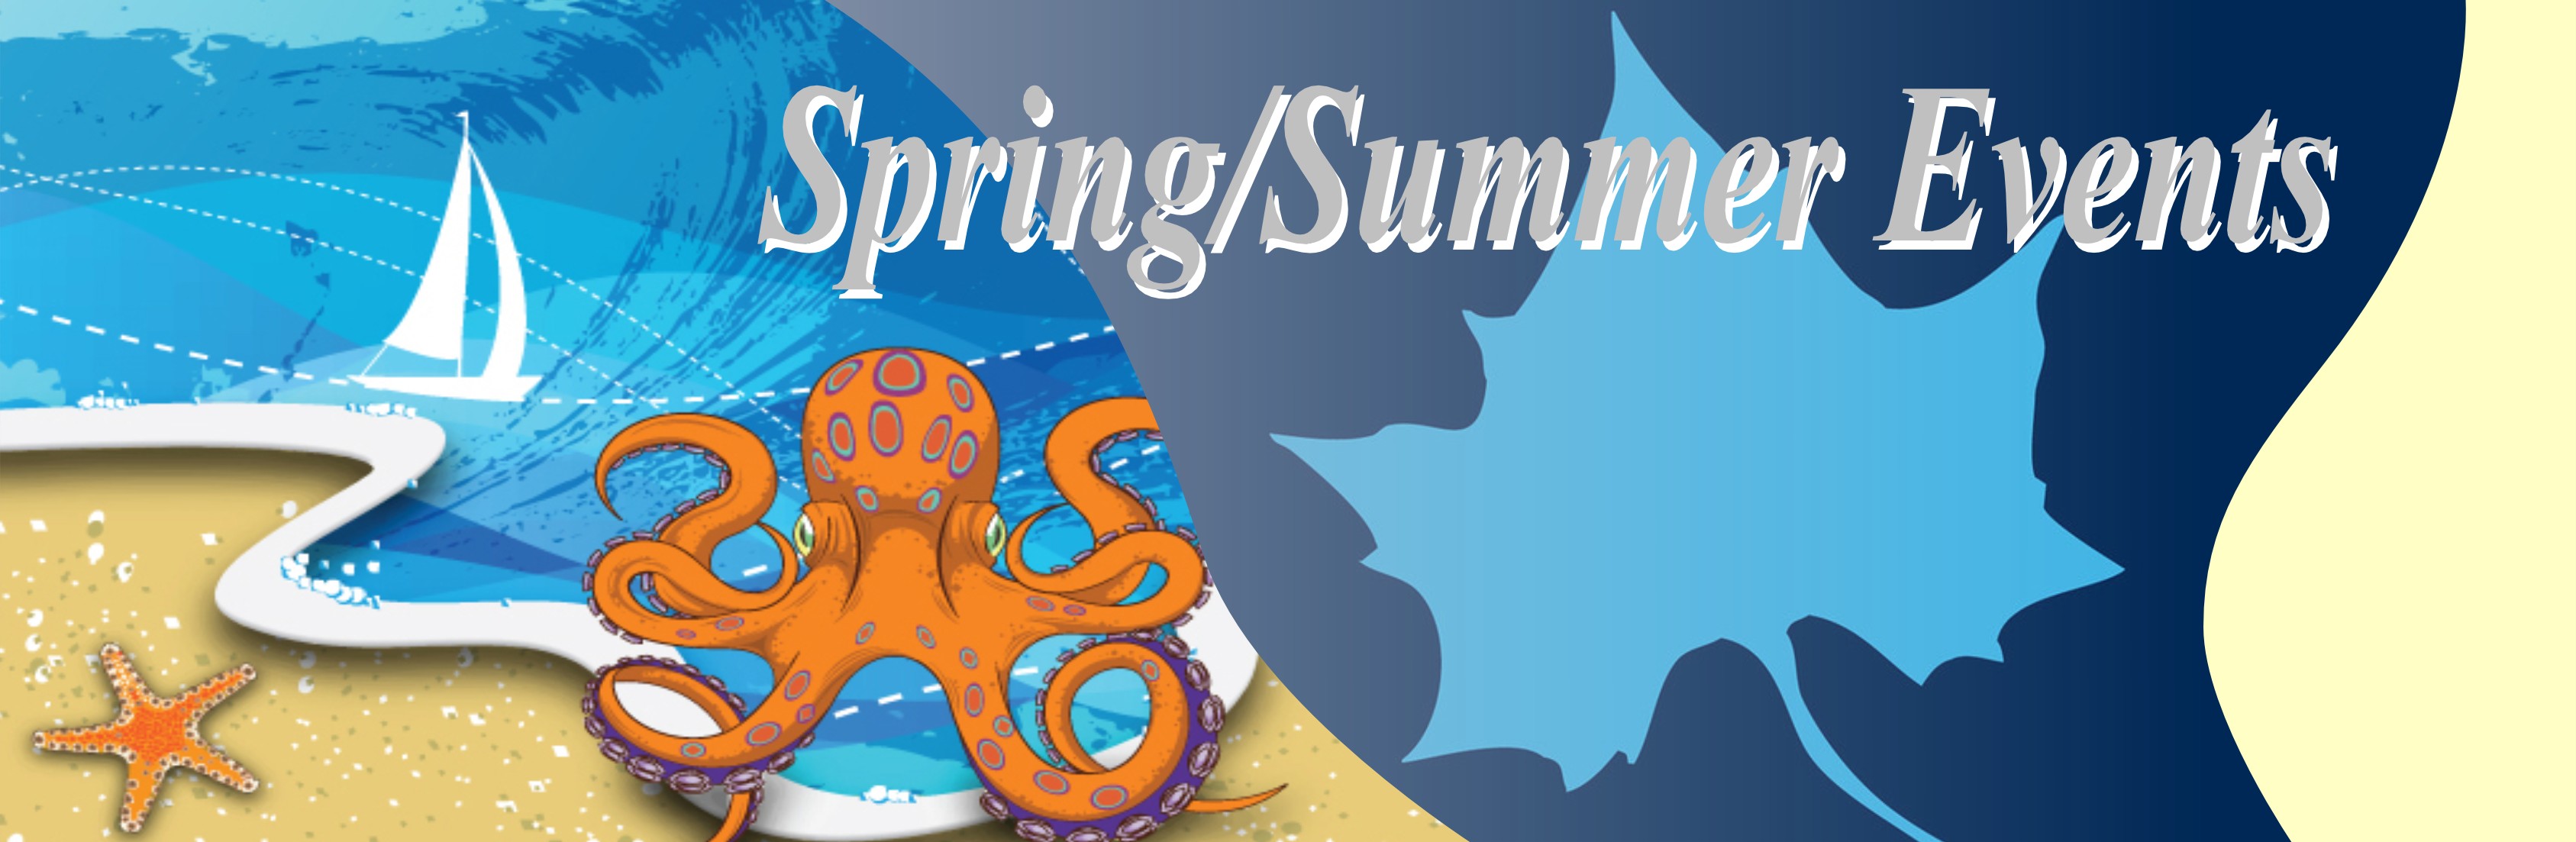 Spring Summer events